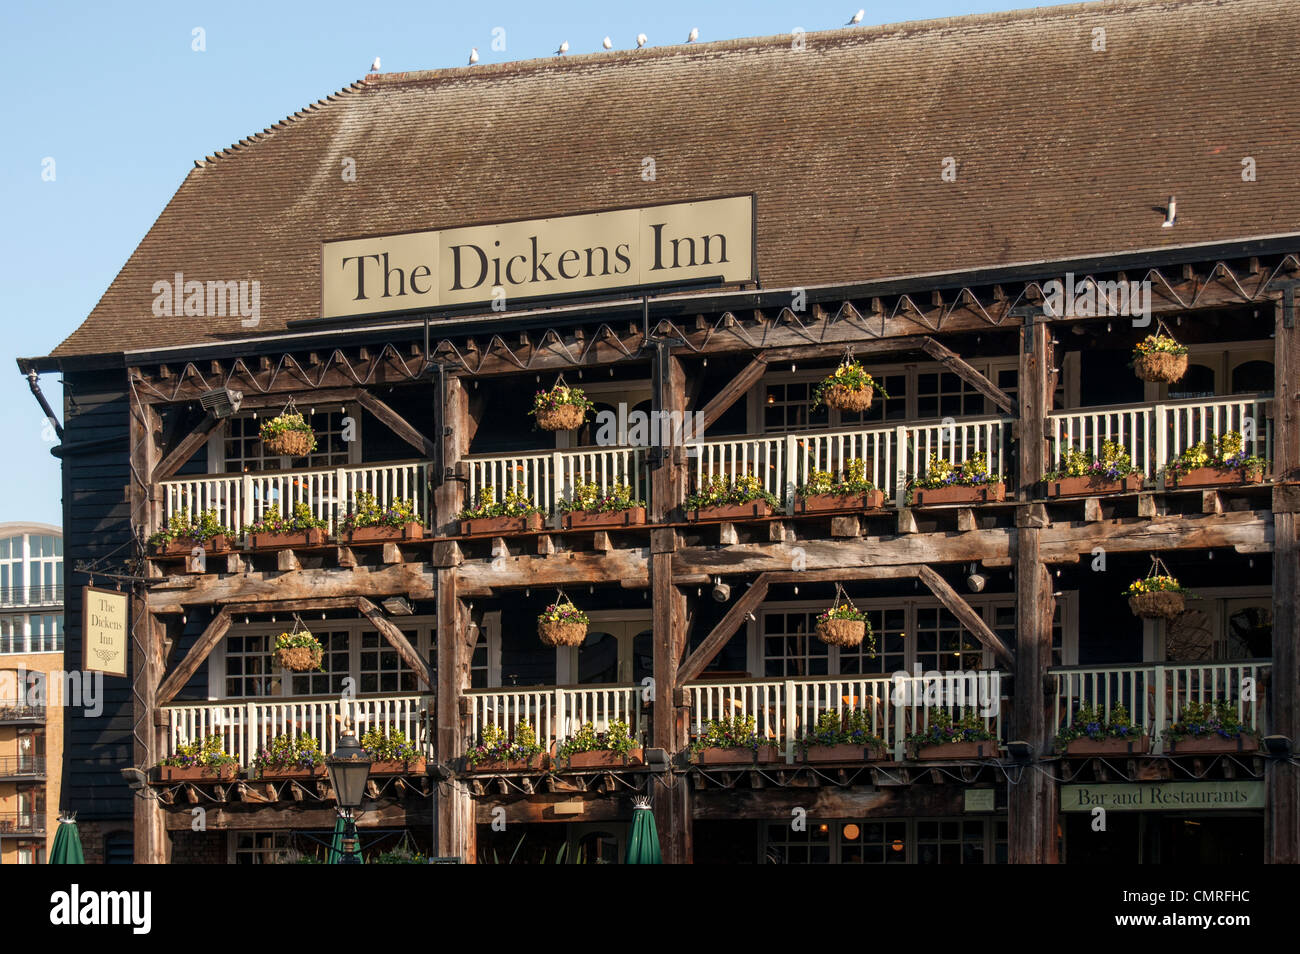 The Dickens Inn, former brewery dating back to 18th century, St Katharine Docks, London - Docklands, England, UK Stock Photo